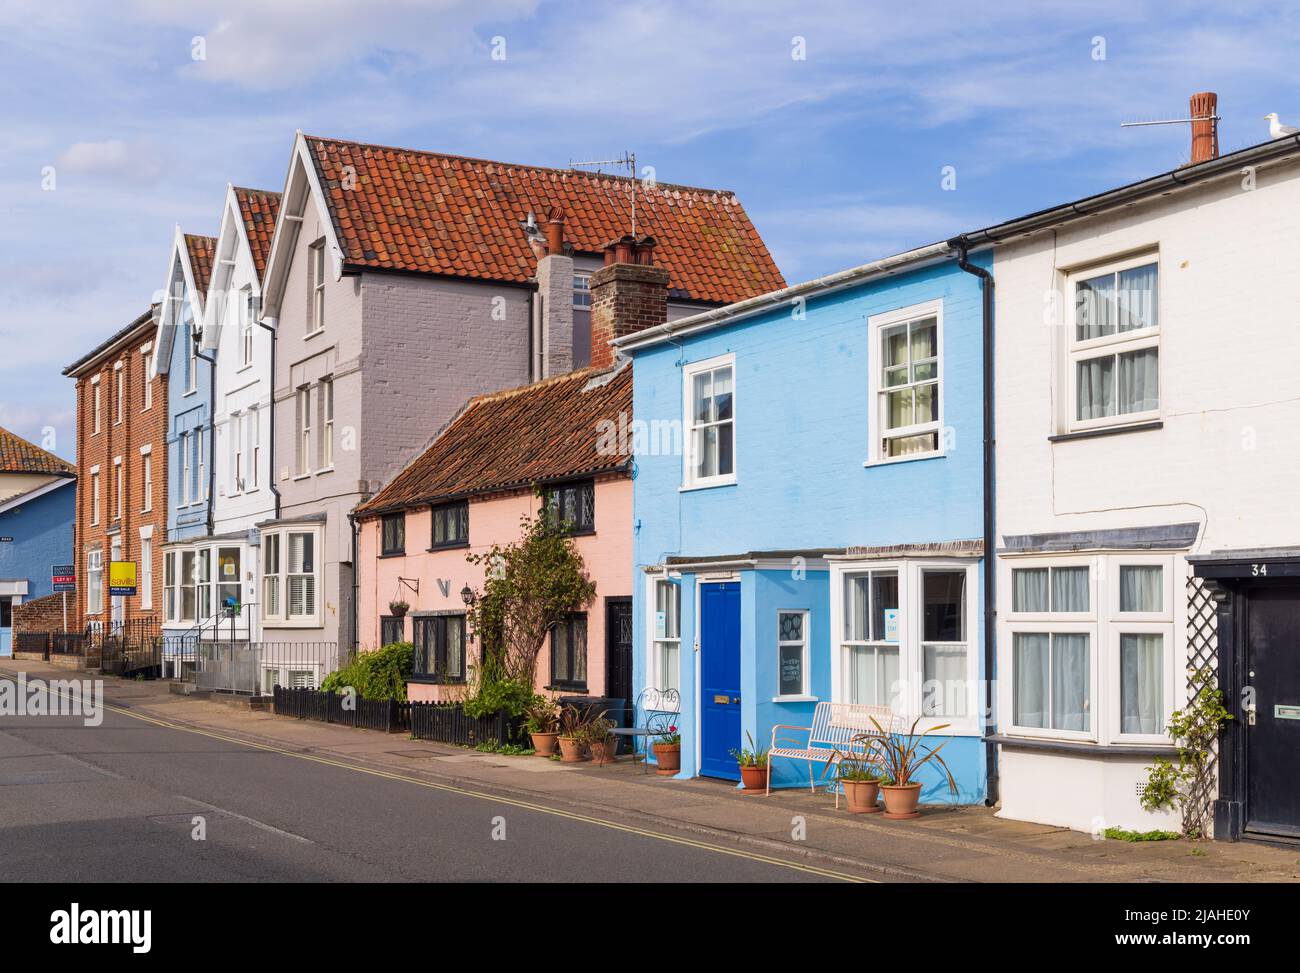 Row of colourful houses and cottages in Aldeburgh High Street, Suffolk. UK. Stock Photo